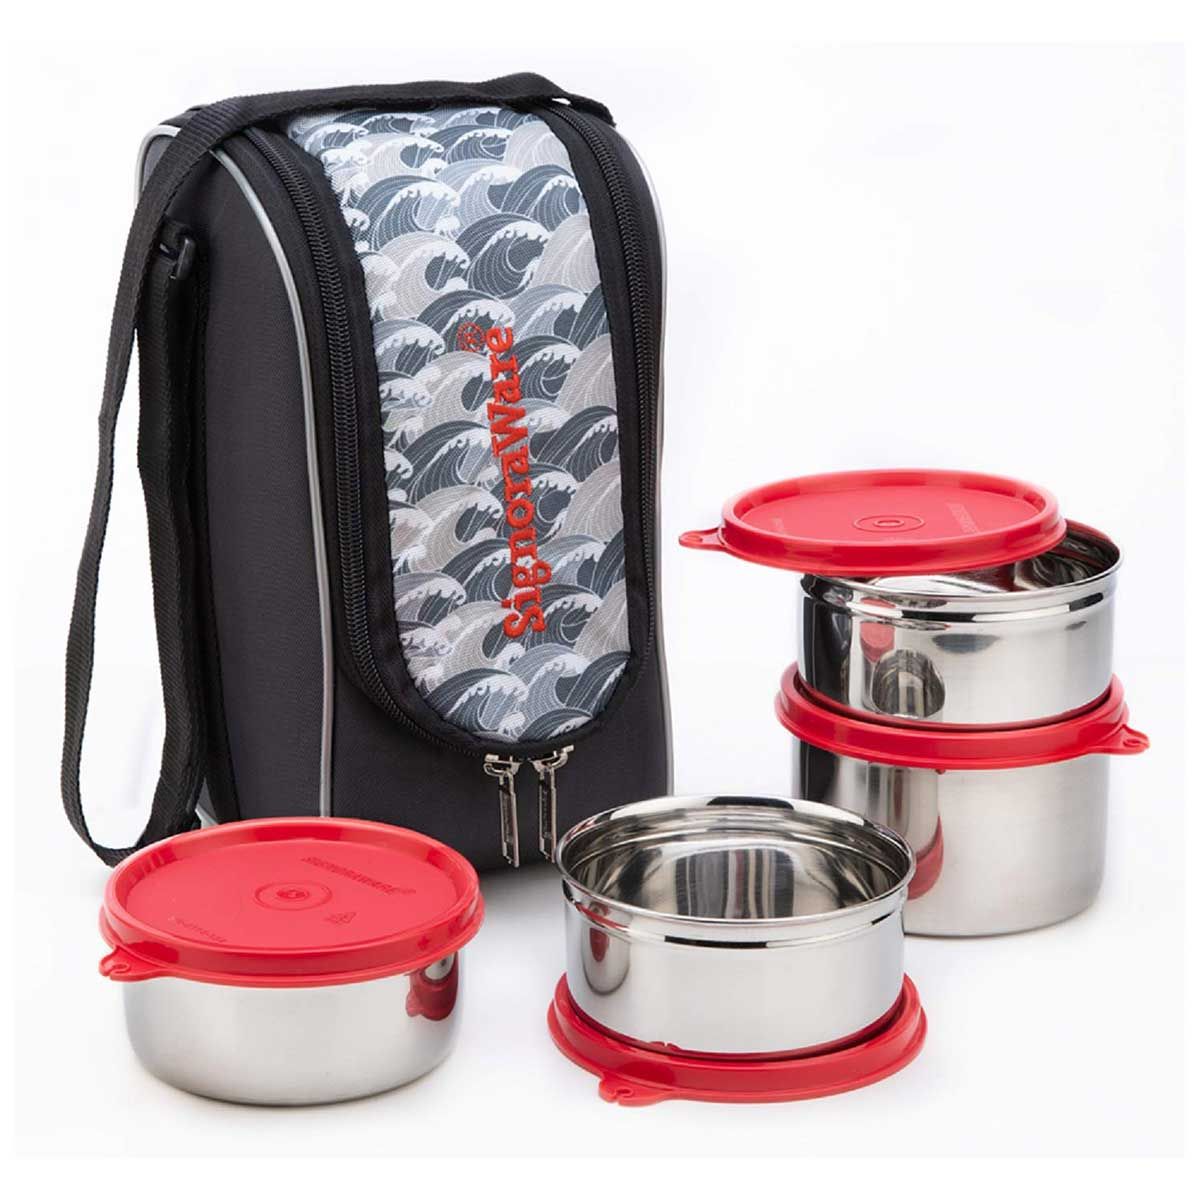 Signoraware Executive Maxx Fresh Steel Stainless Steel Lunch Box with Bag